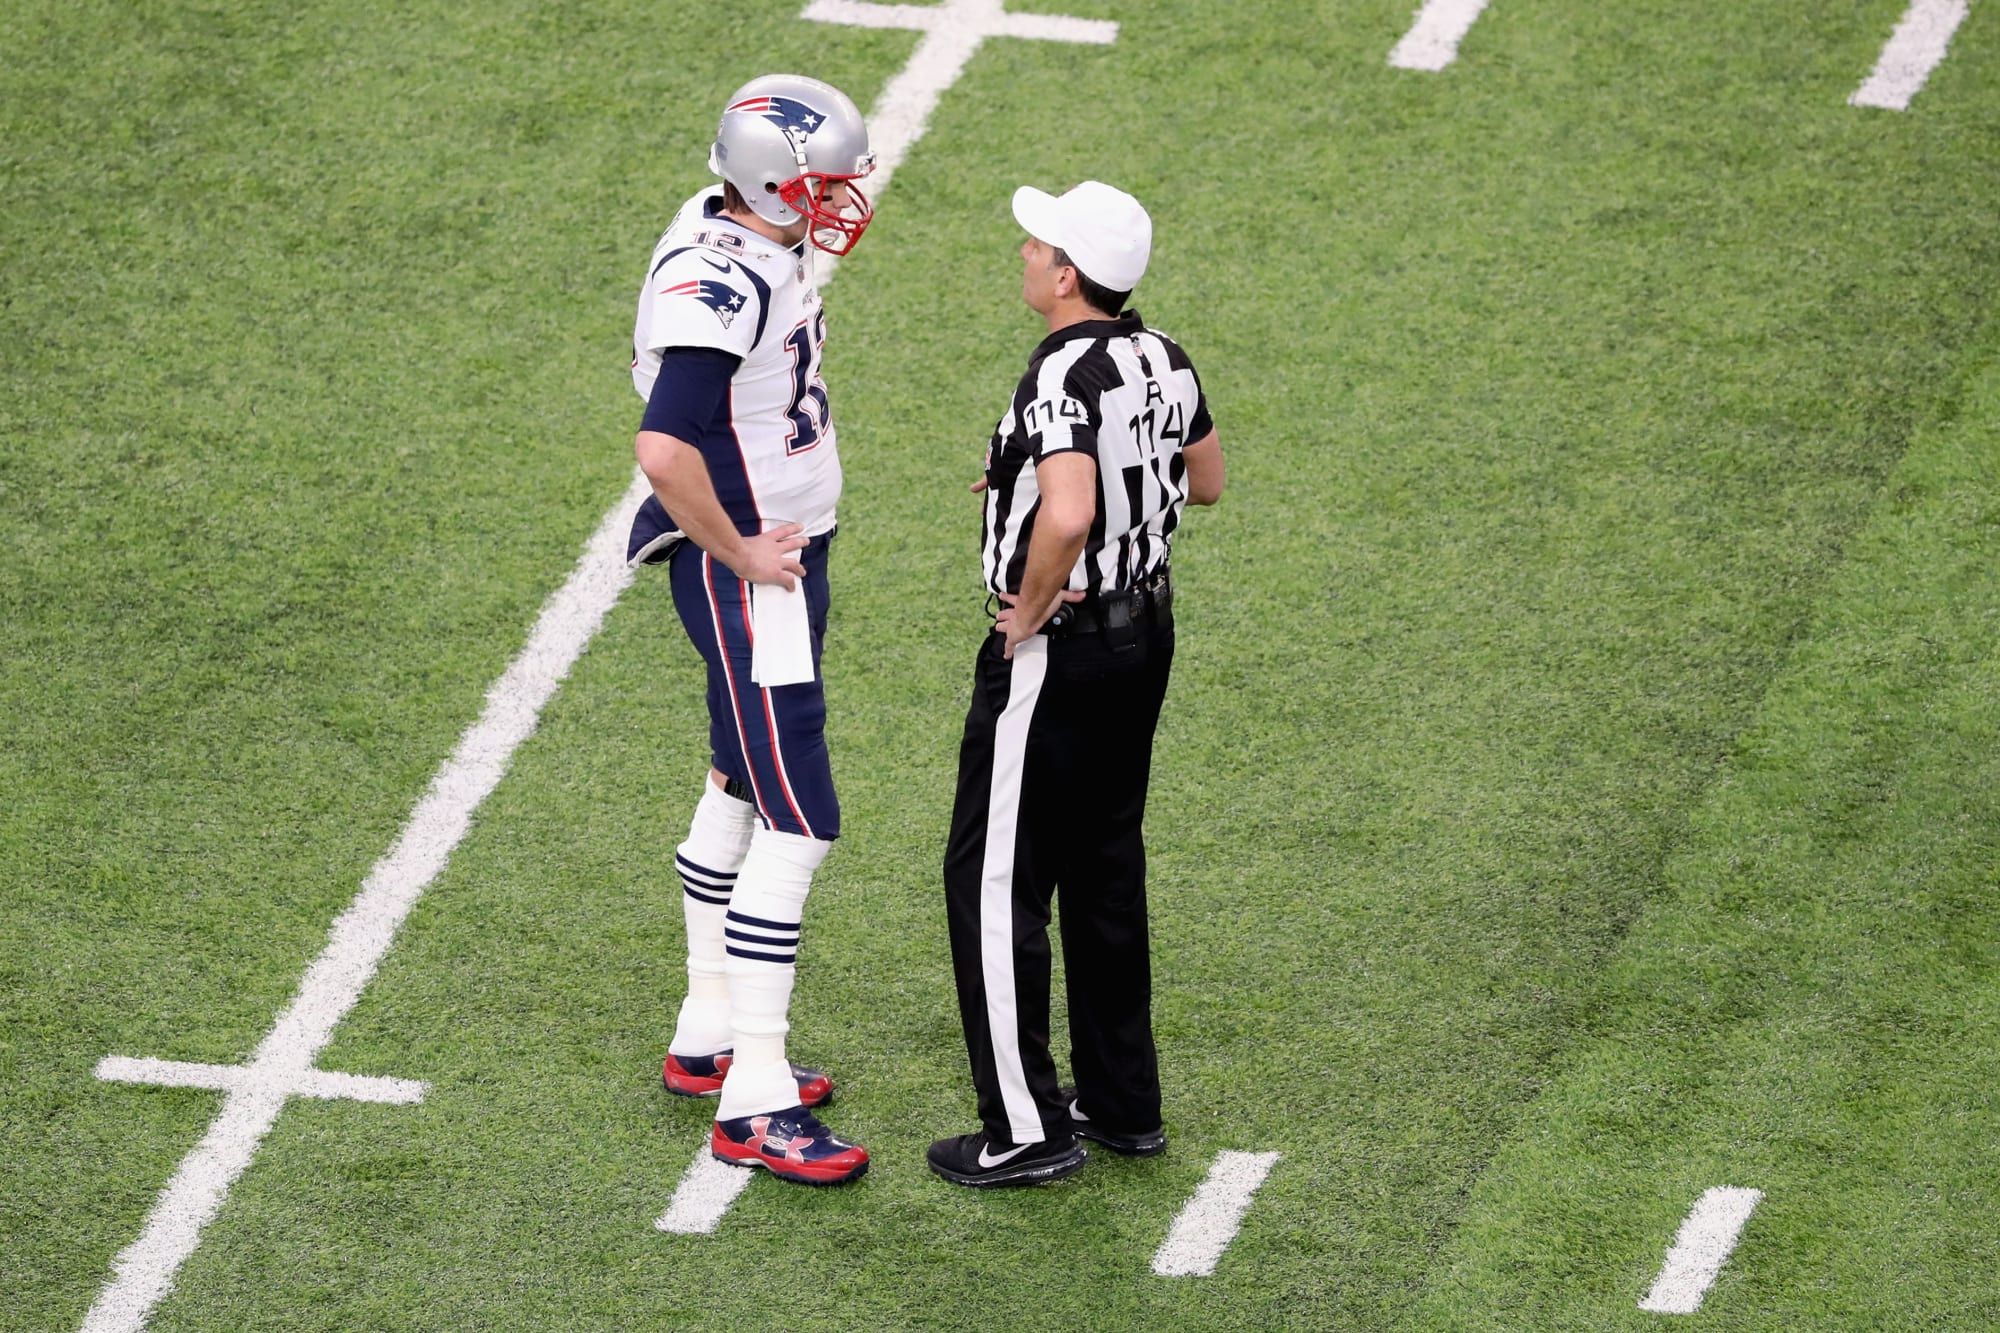 Let's talk about the Super Bowl being rigged (it's not so stop)